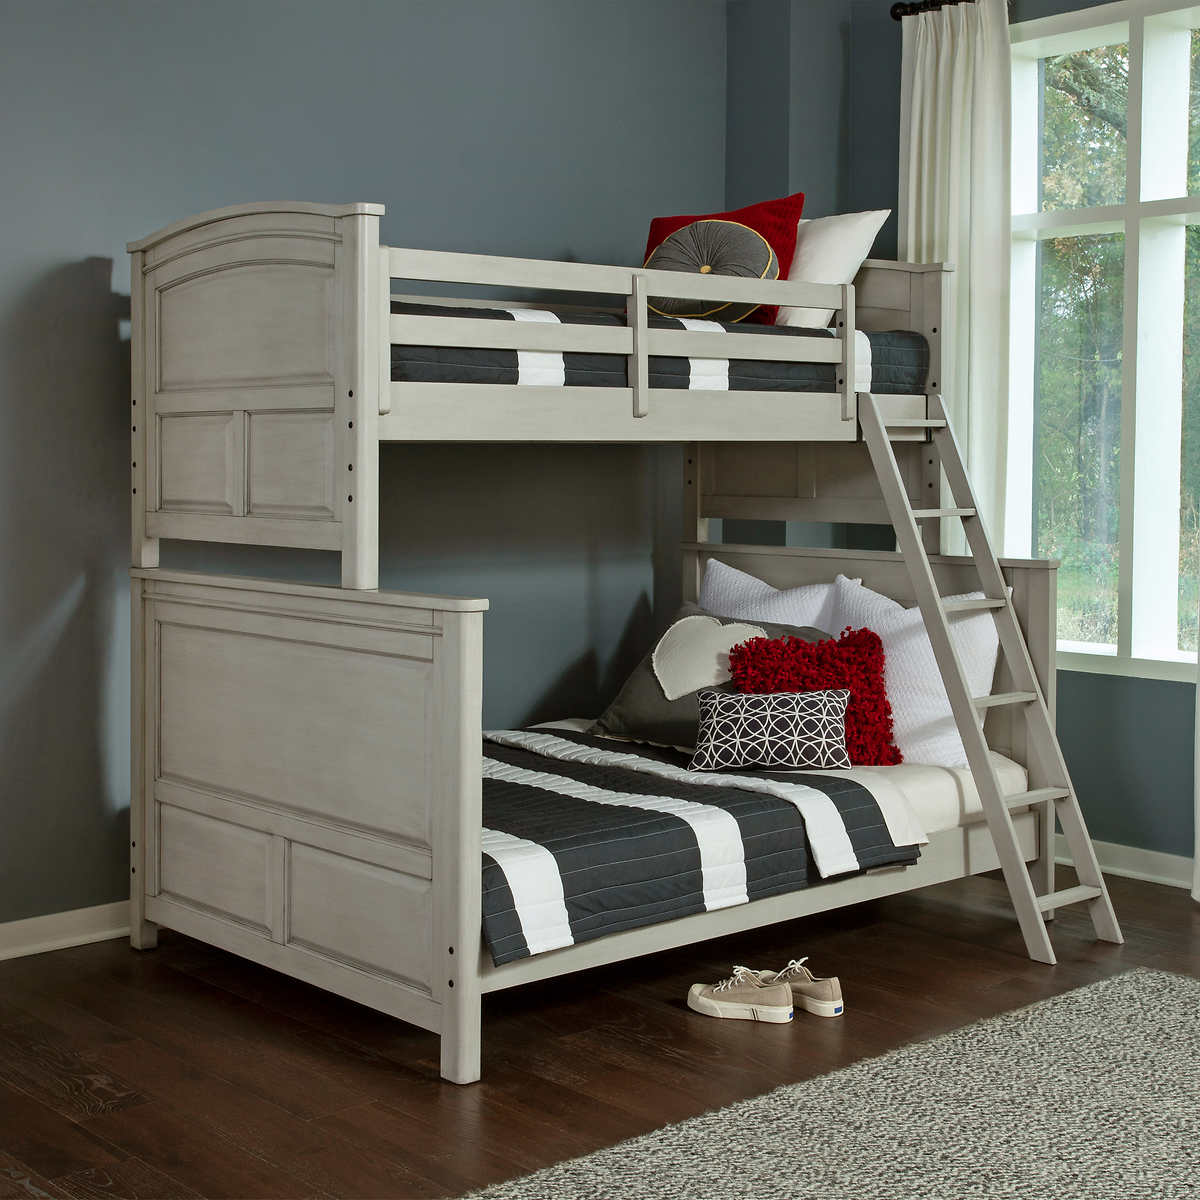 Wingate Twin Over Full Bunk Bed Costco, Specialty Bunk Beds